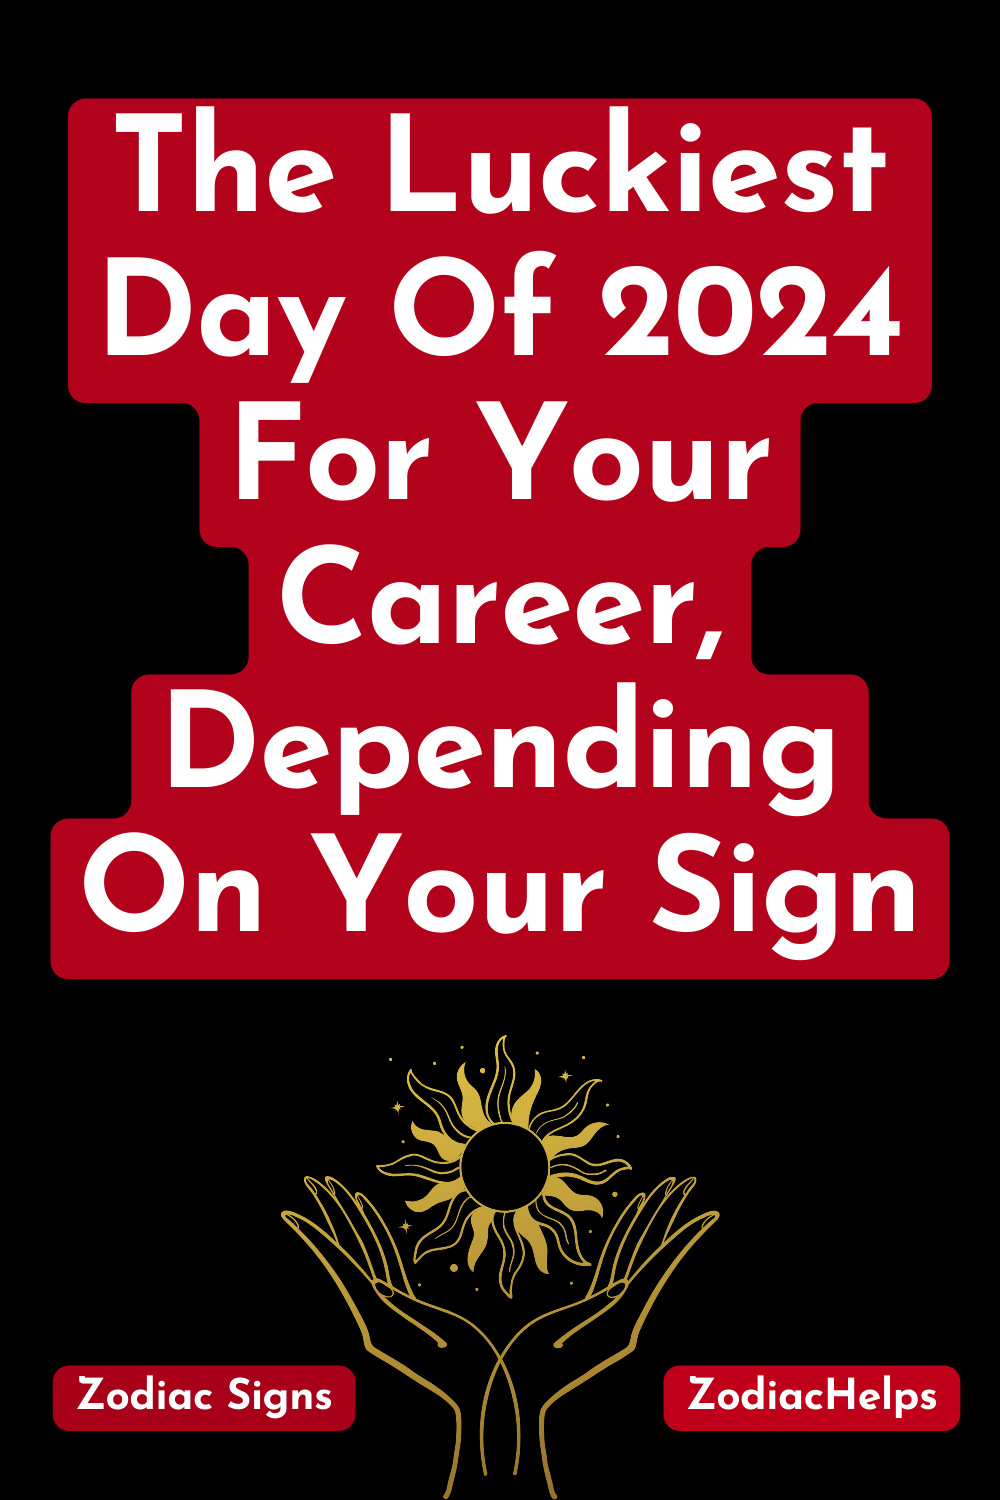 The Luckiest Day Of 2024 For Your Career, Depending On Your Sign